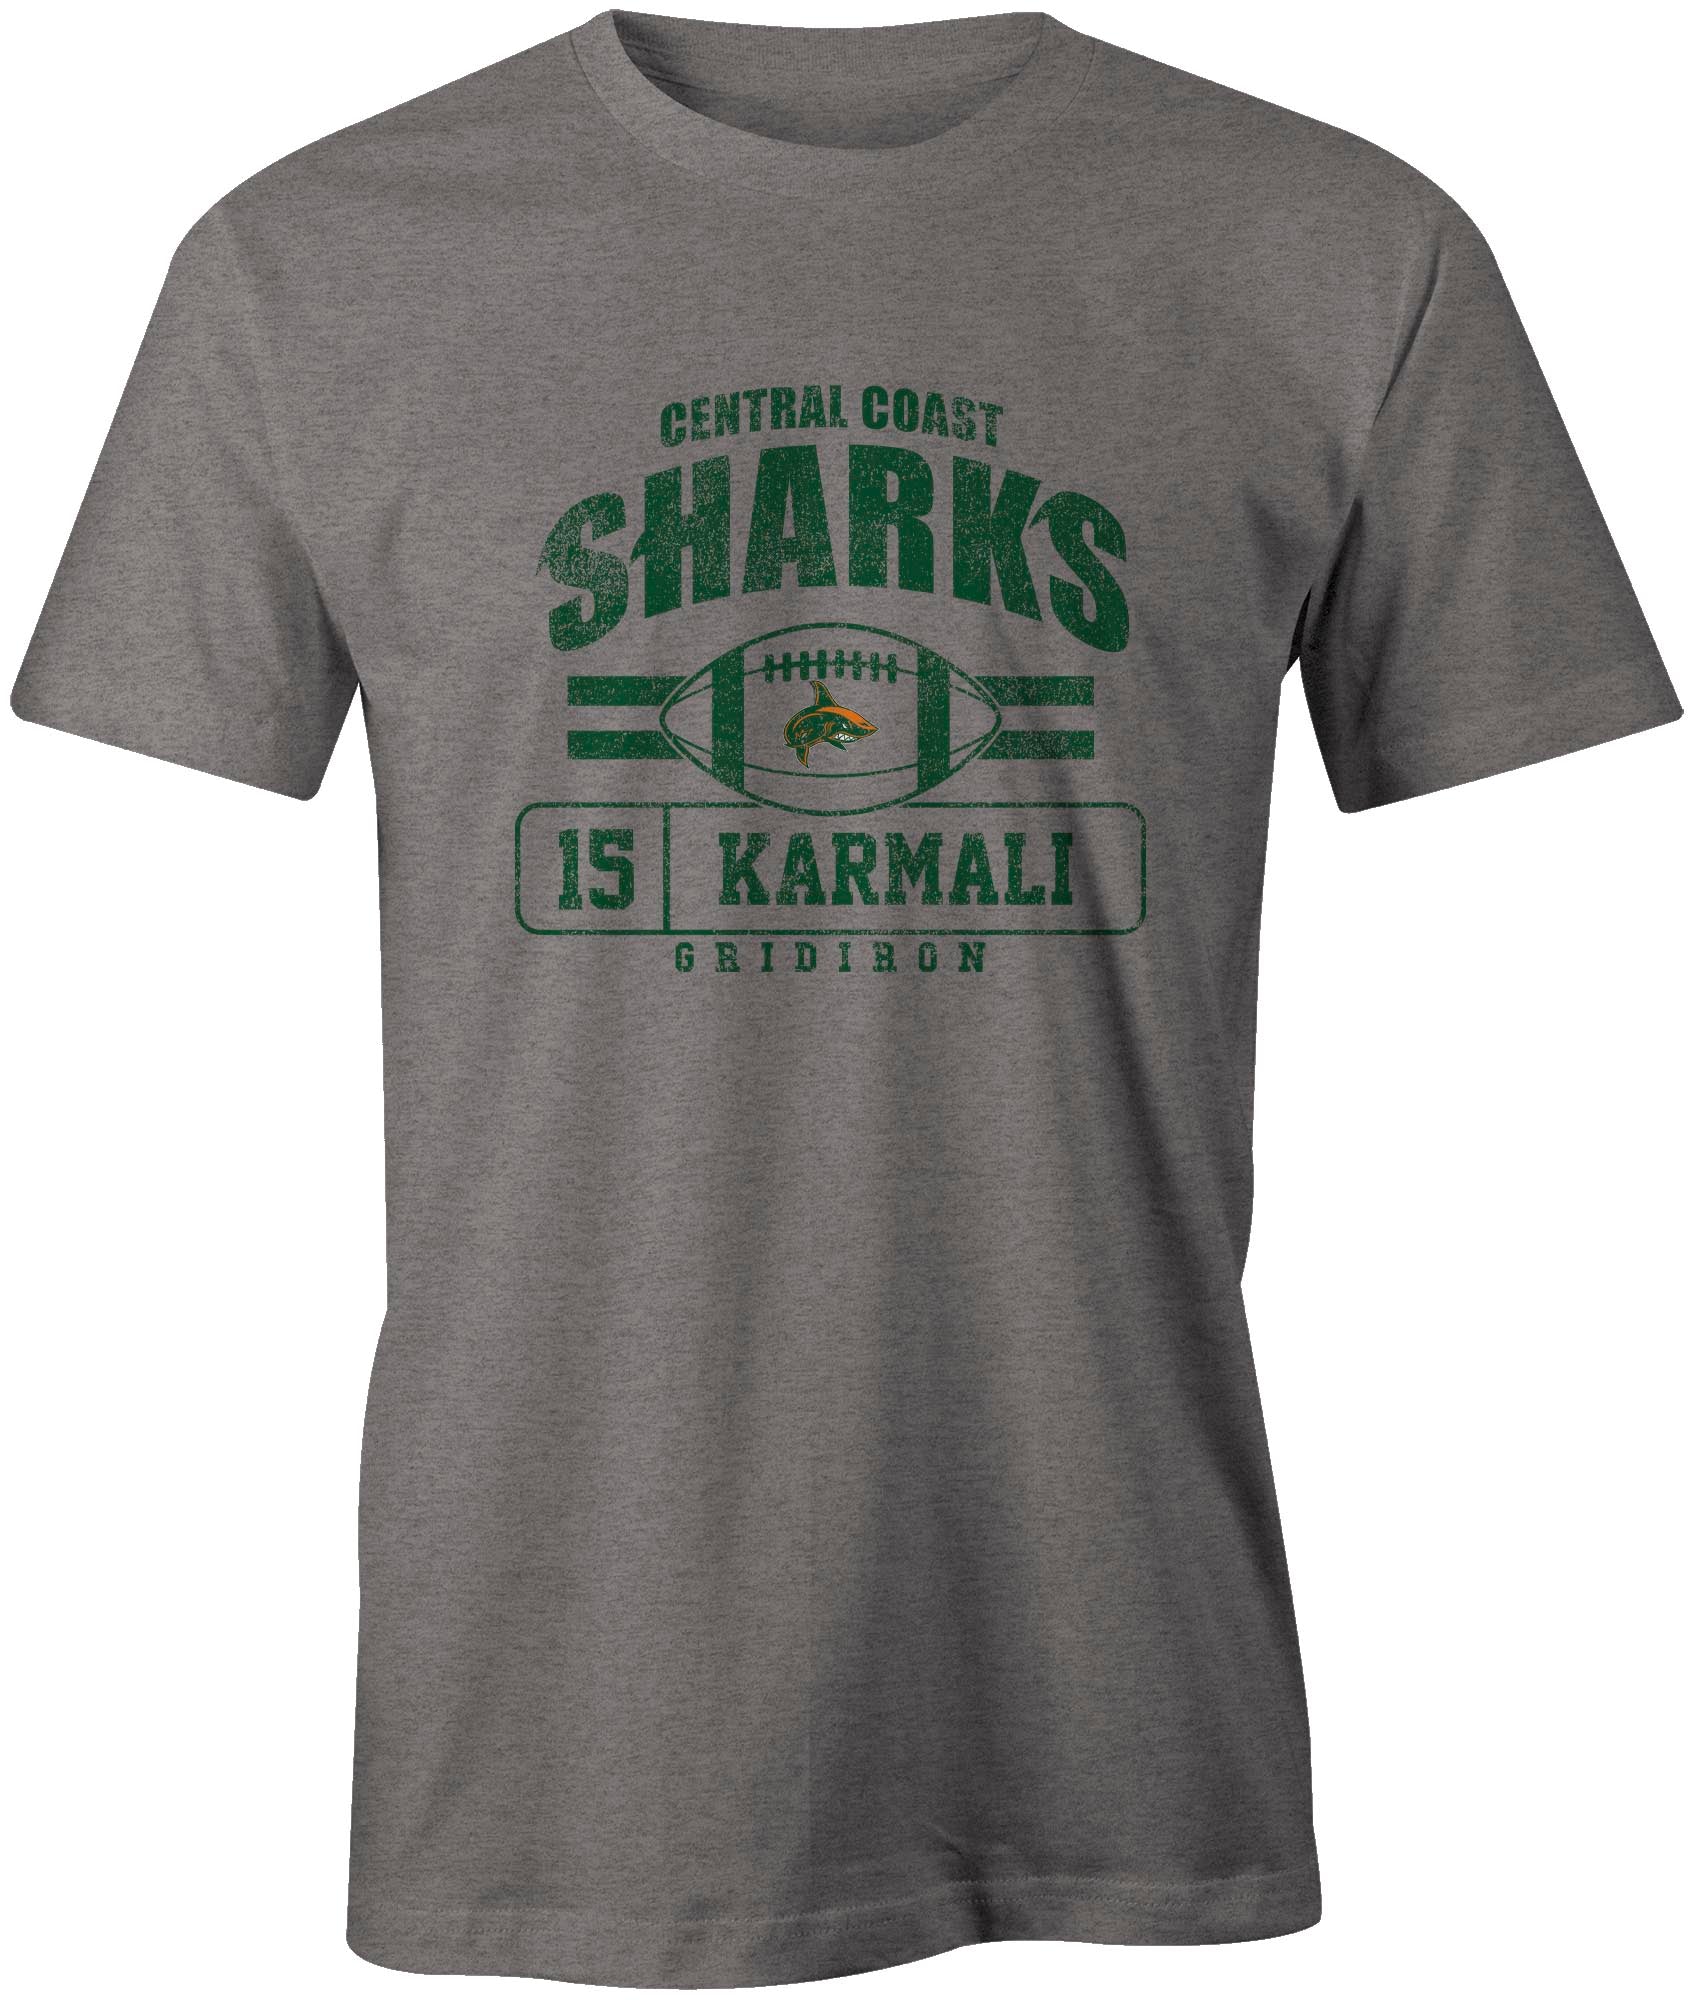 Central Coast Sharks Official Player Issue T-Shirt